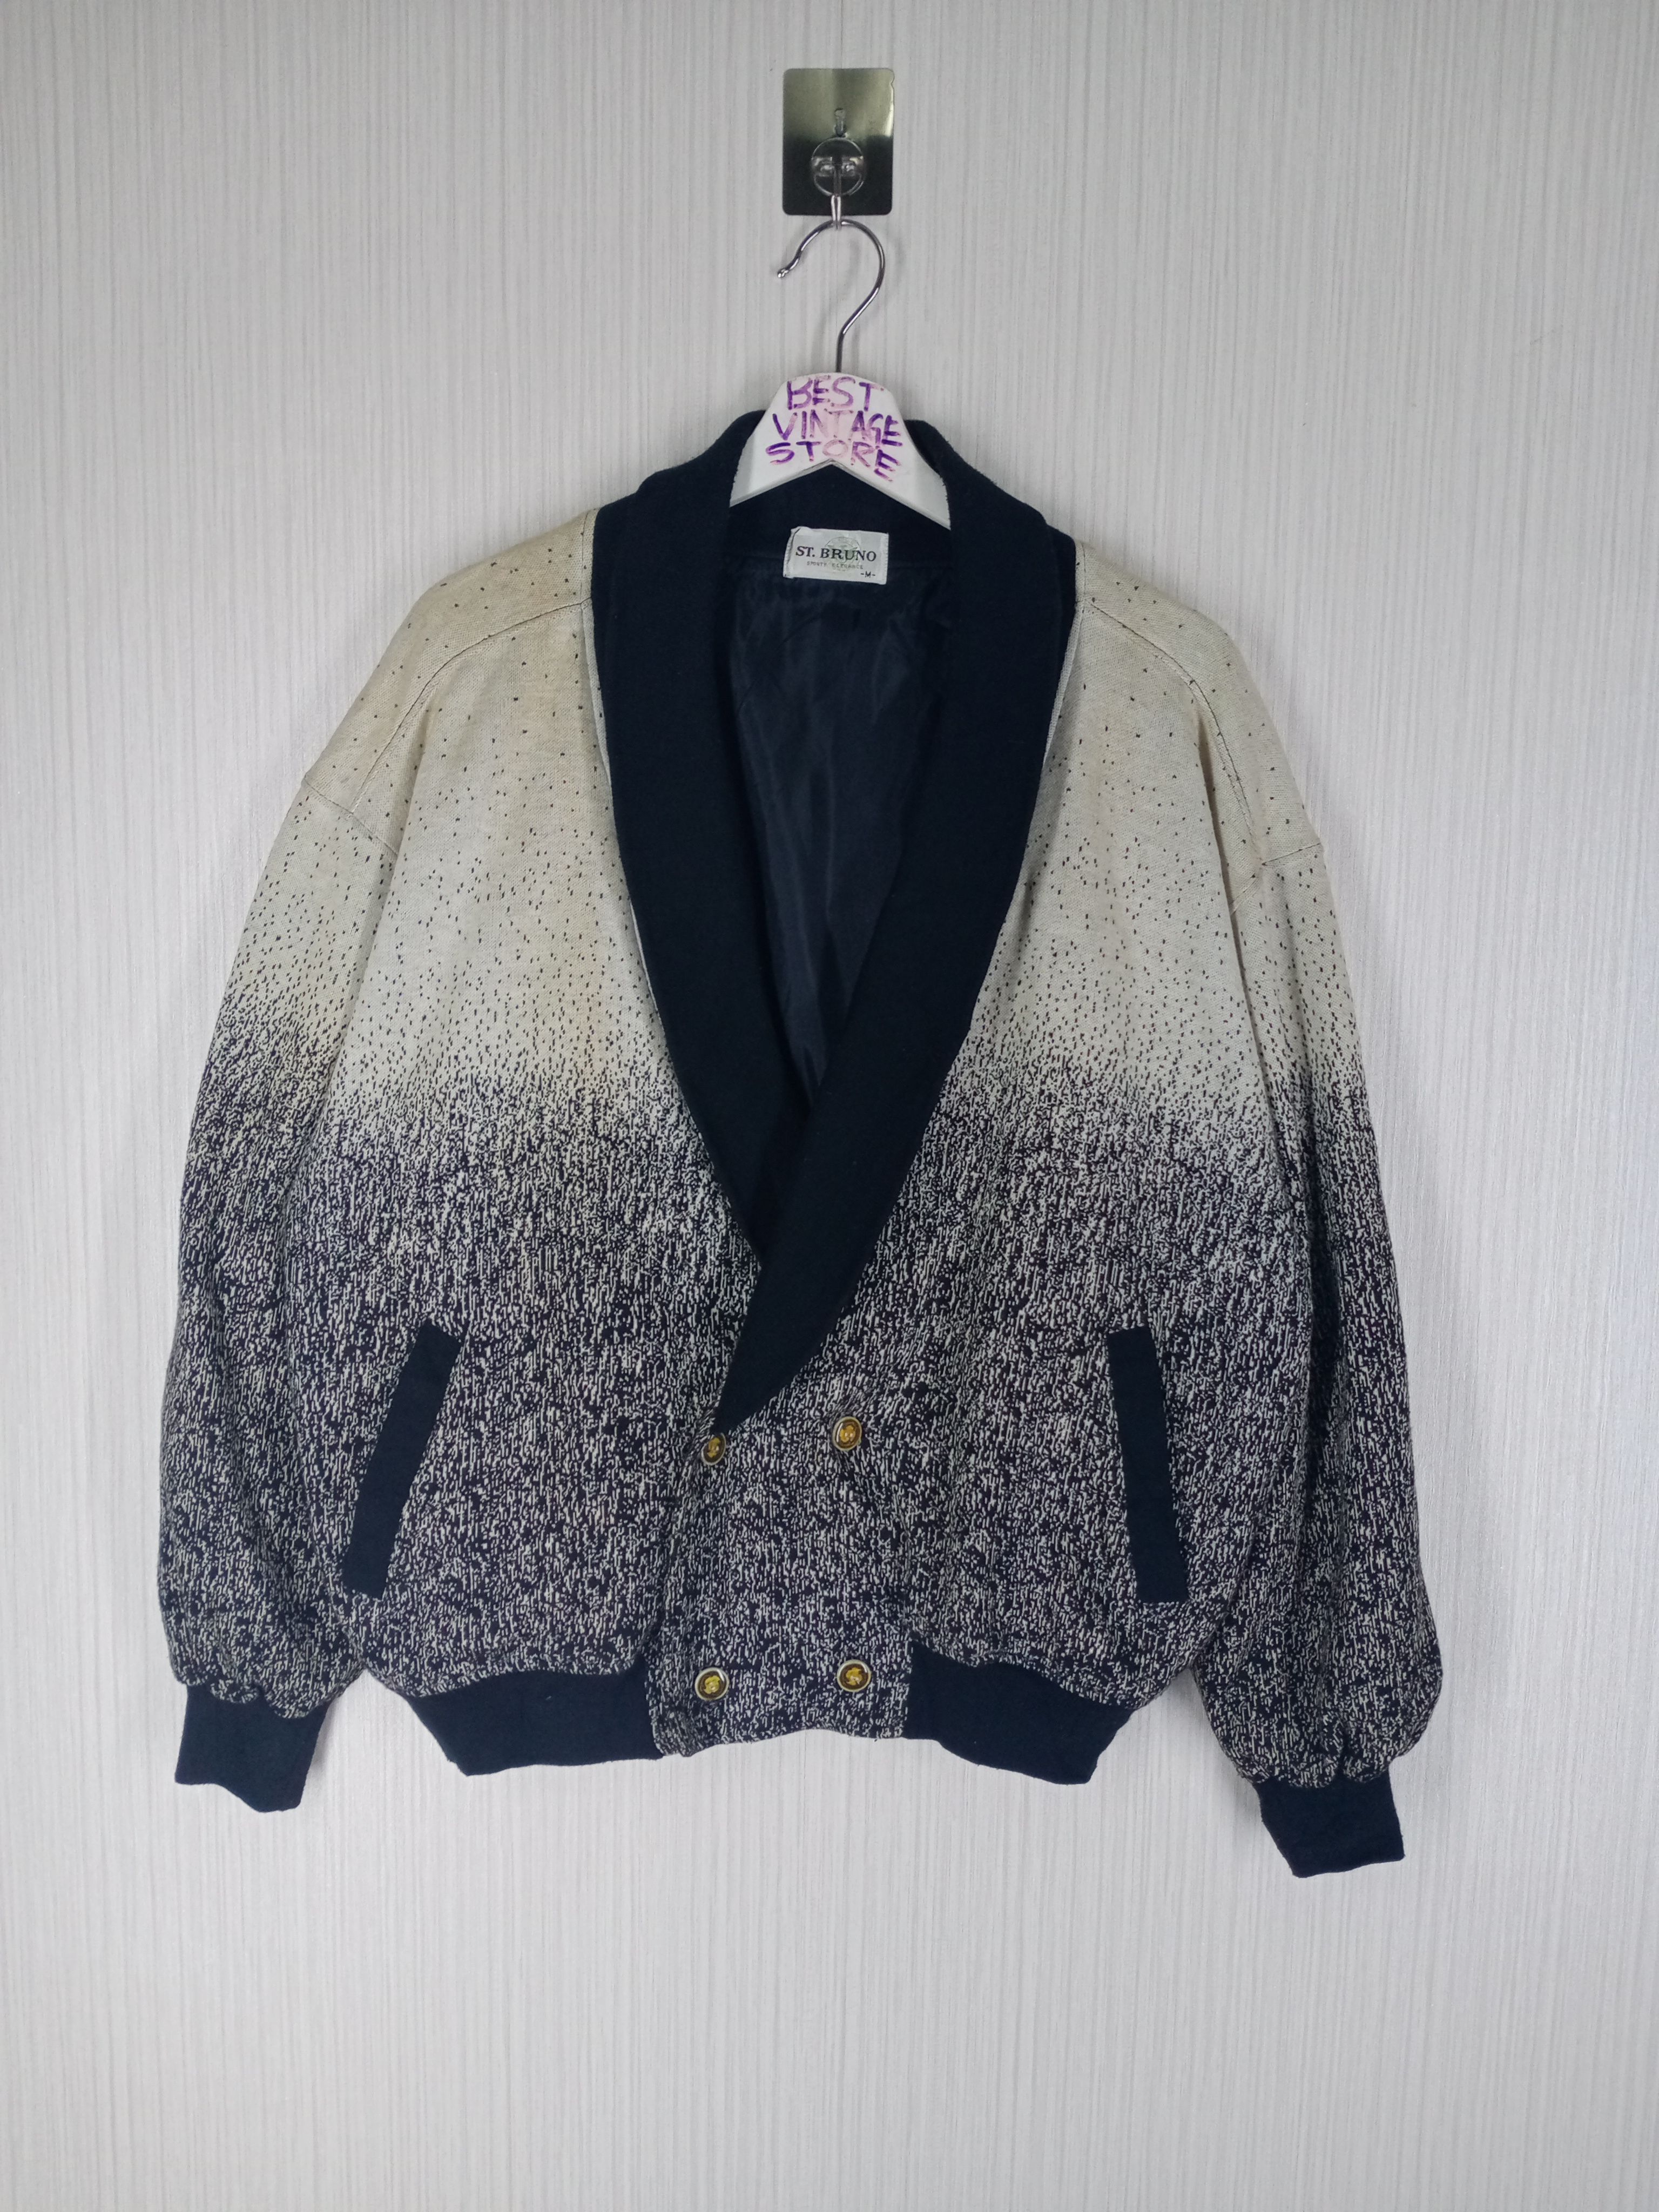 Pre-owned Cardigan X Vintage St.bruno Japanese Cardigan In No Colour